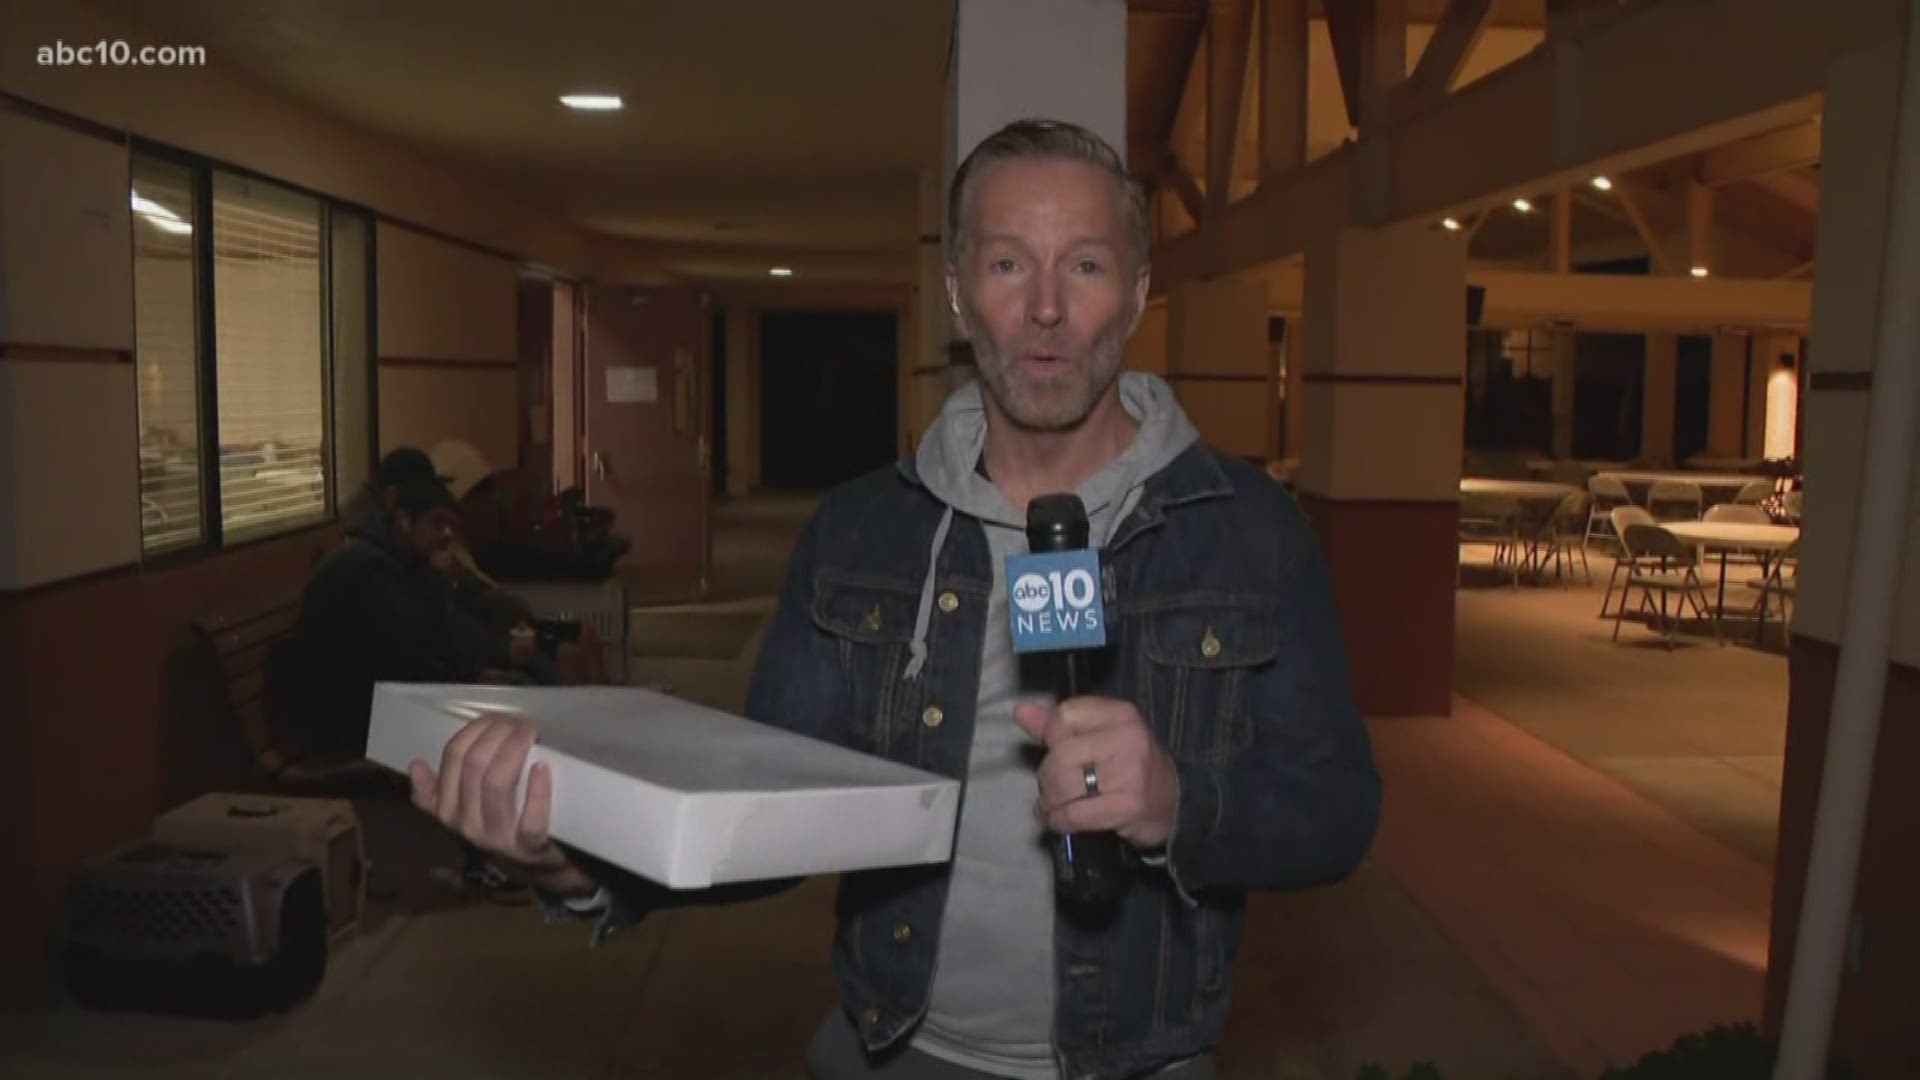 Residents displaced by the Kincade Fire shared their thoughts on evacuating and shared some donuts Monday morning.